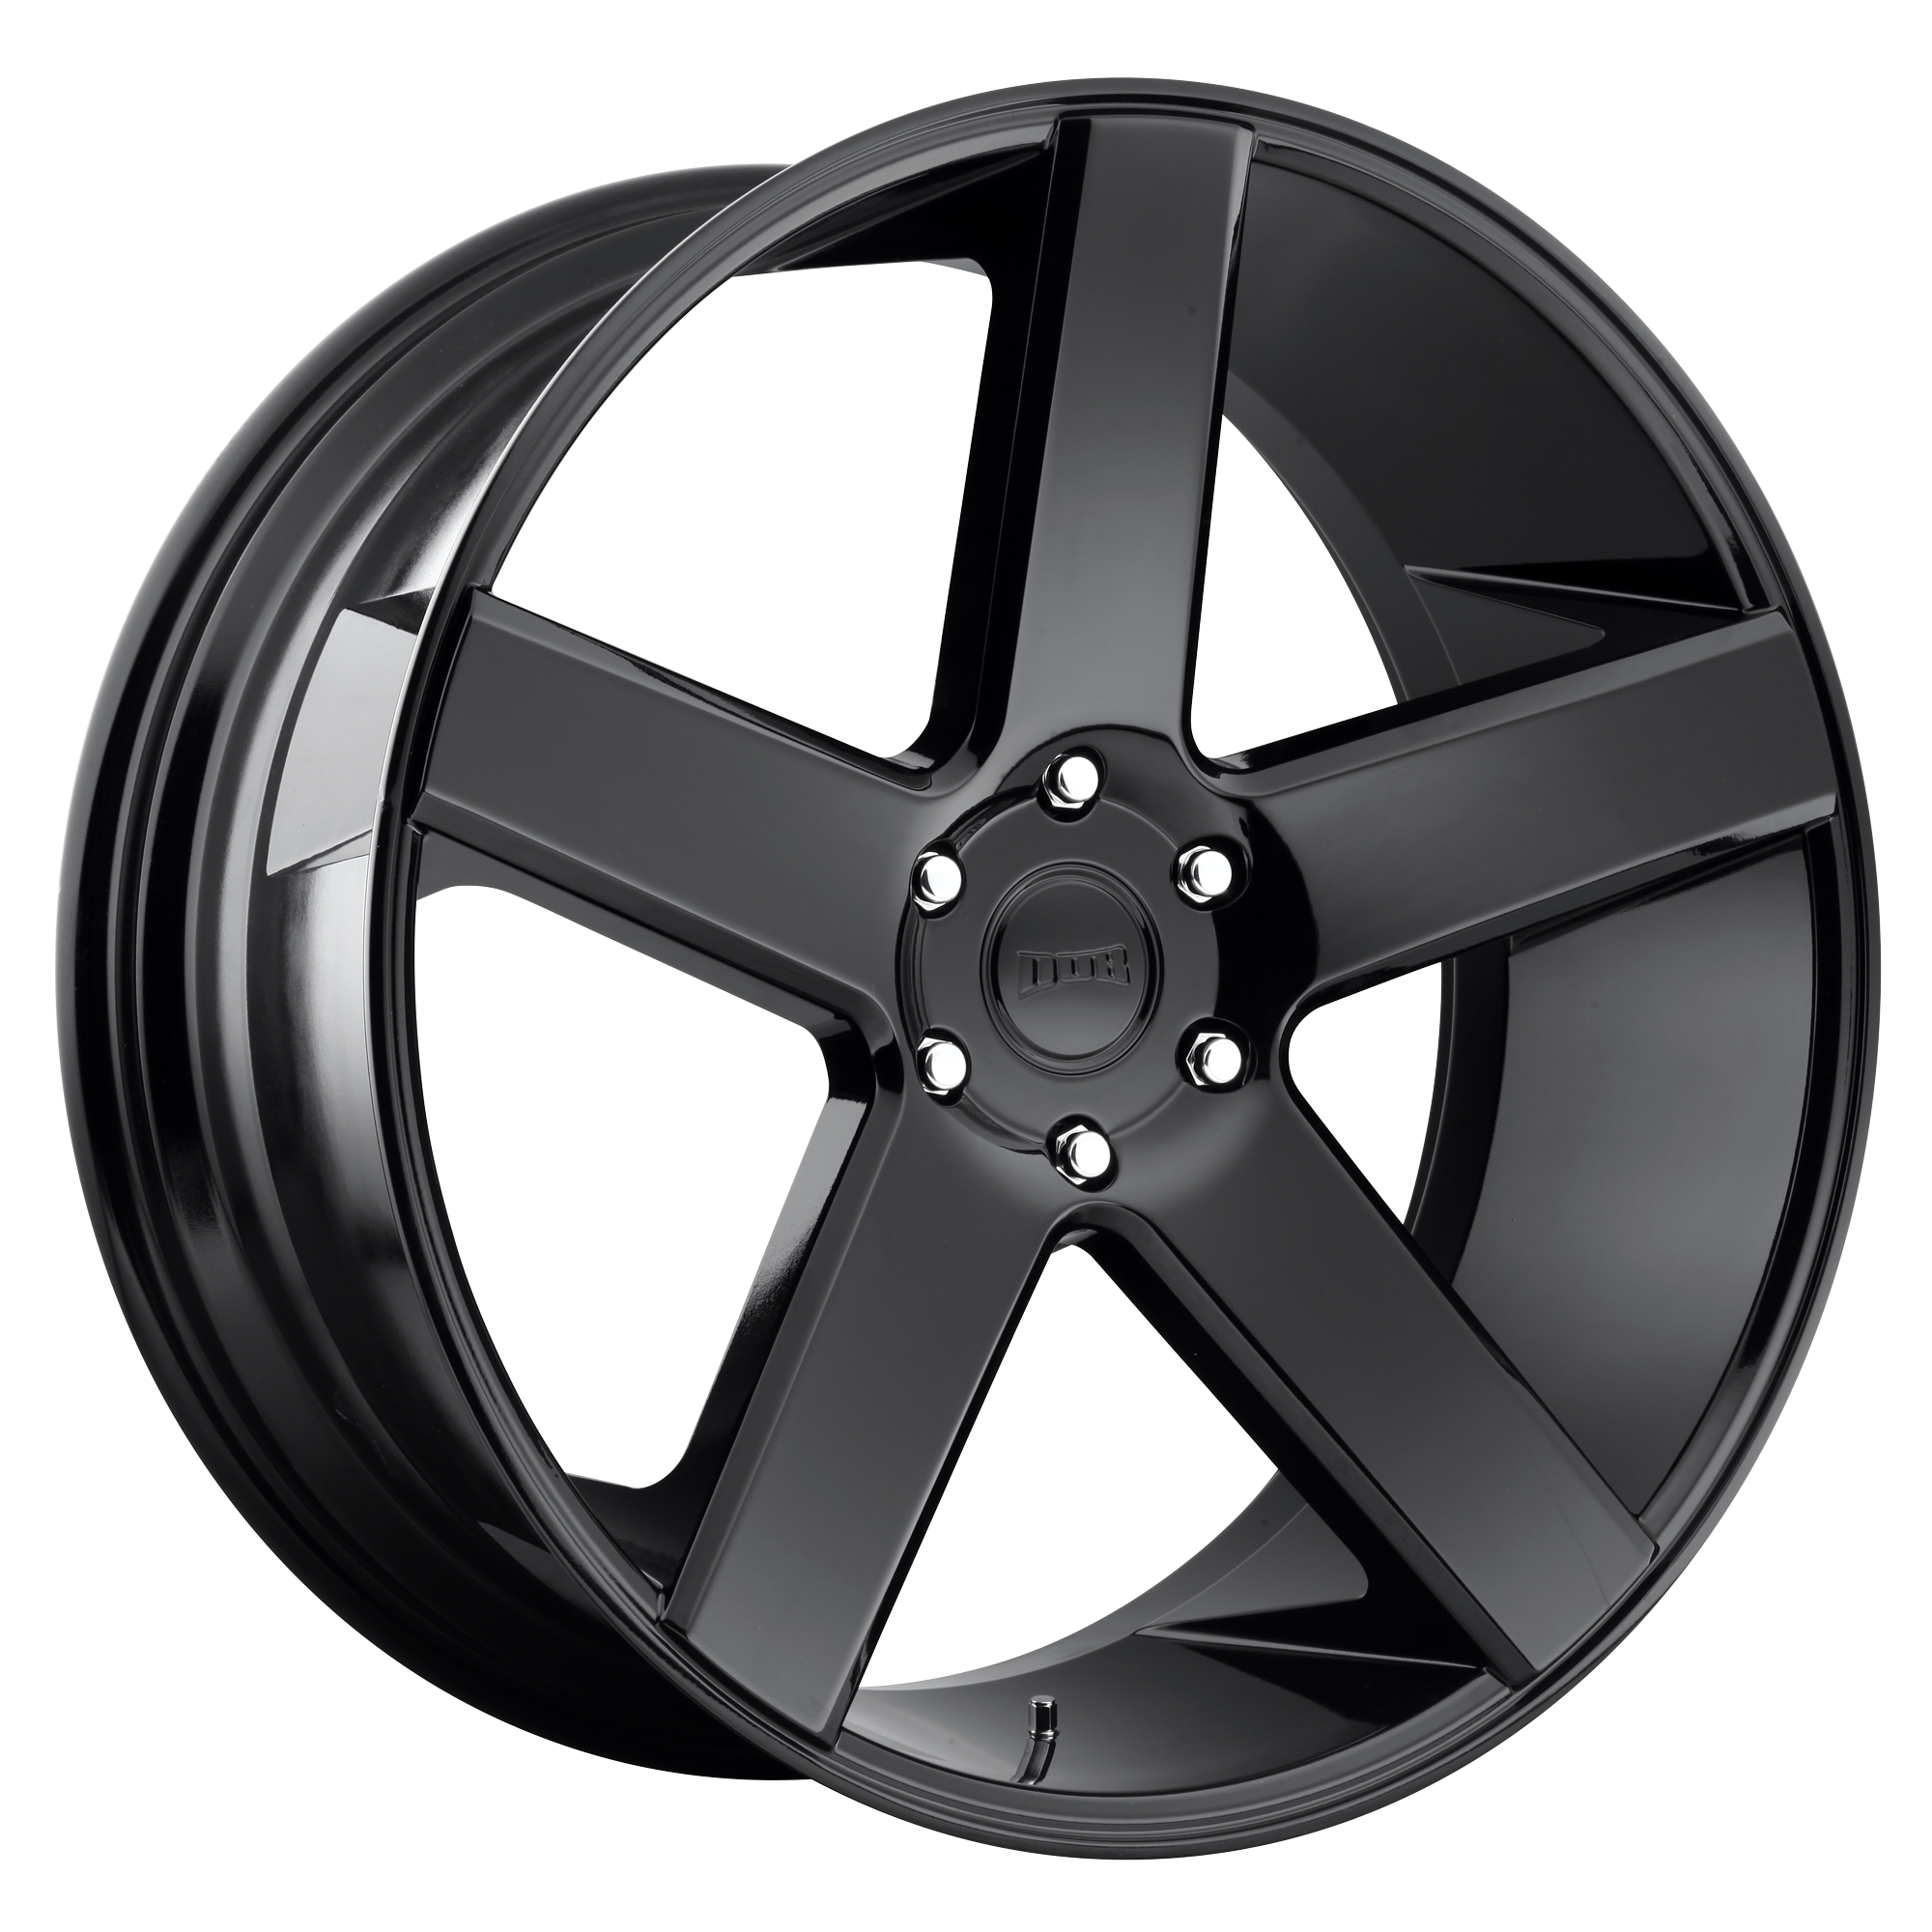 BALLER 22x9 5x120.00 GLOSS BLACK (15 mm) - Tires and Engine Performance